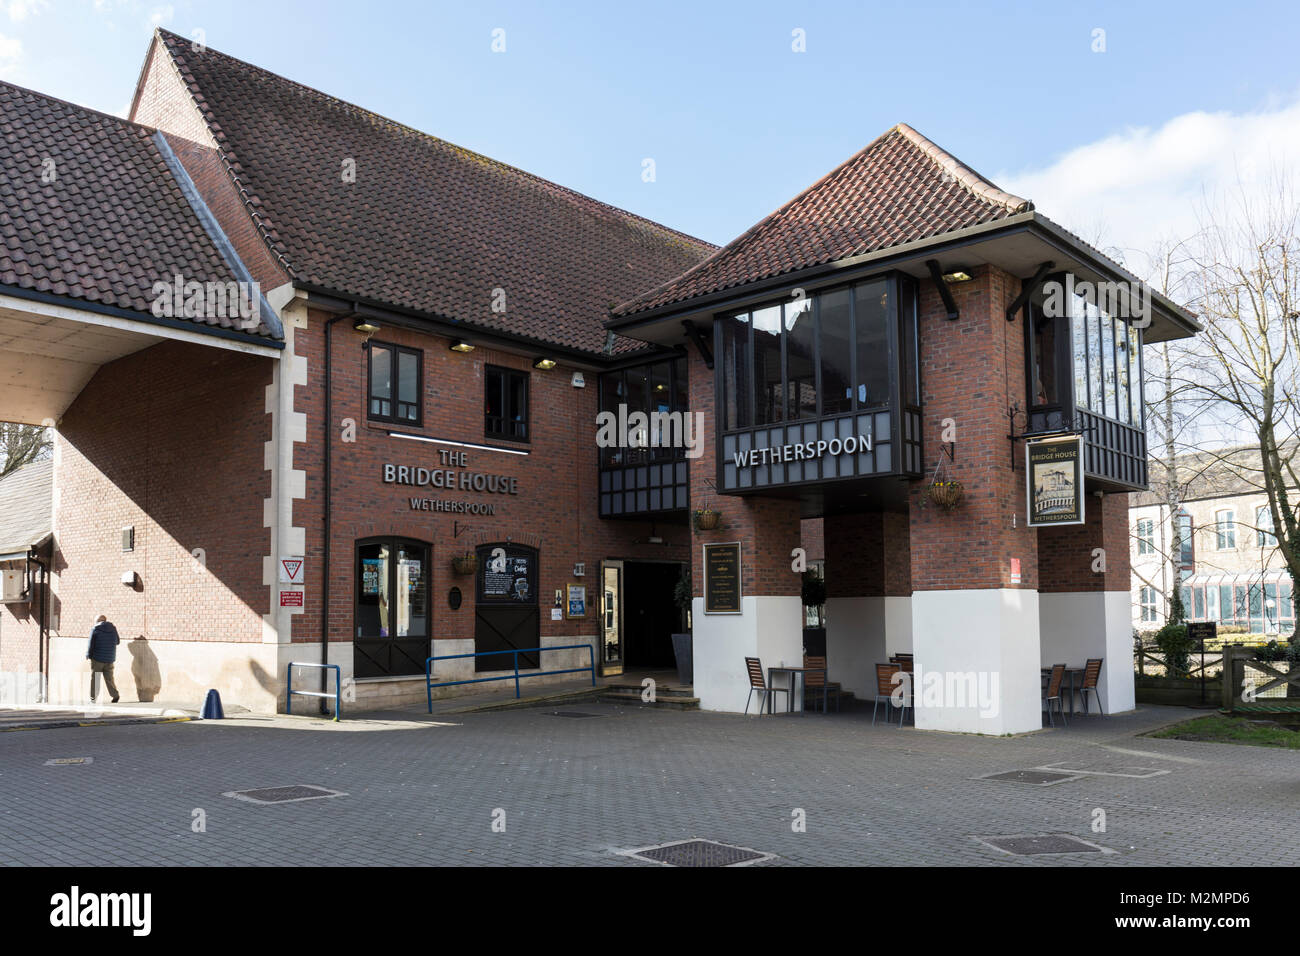 The Bridge House is a Wetherspoon pub in Chippenham, Wiltshire, England, UK Stock Photo